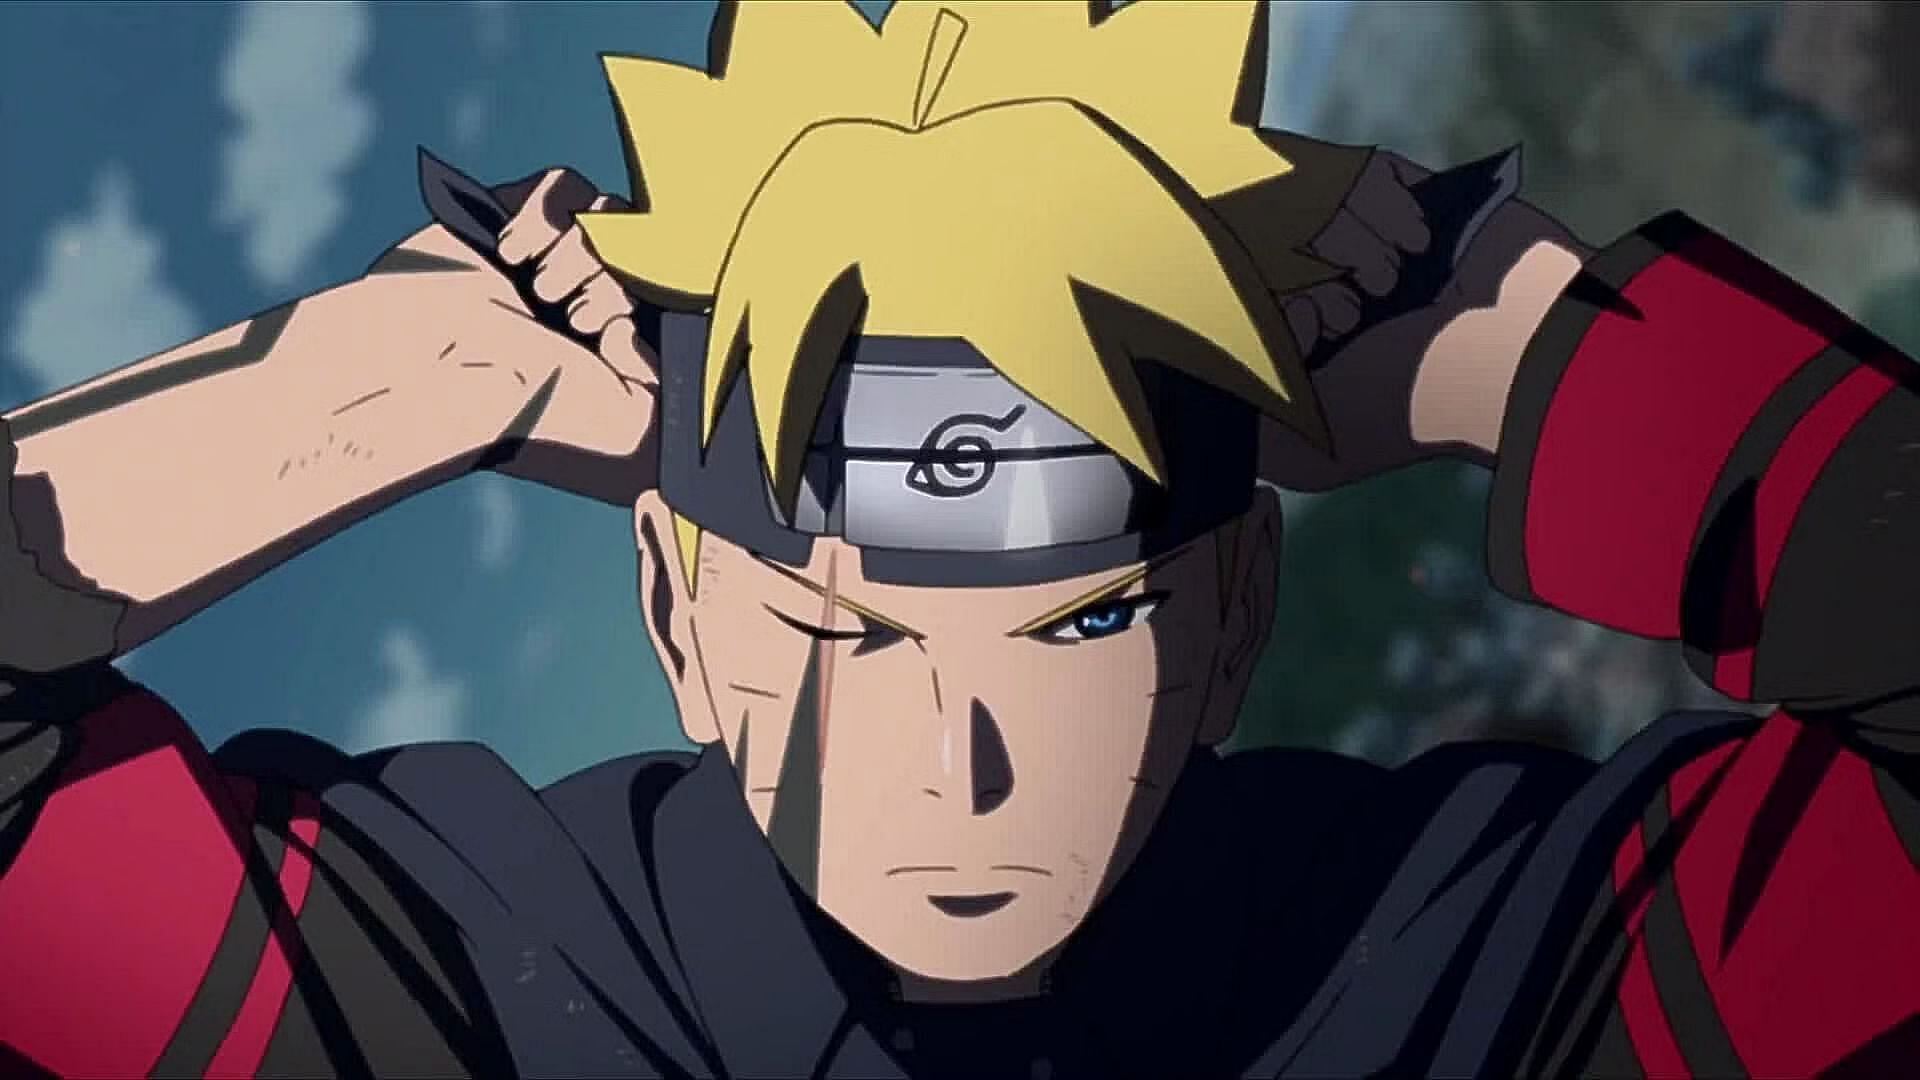 Boruto becoming the &quot;villain&quot; may have been foreshadowed from the manga